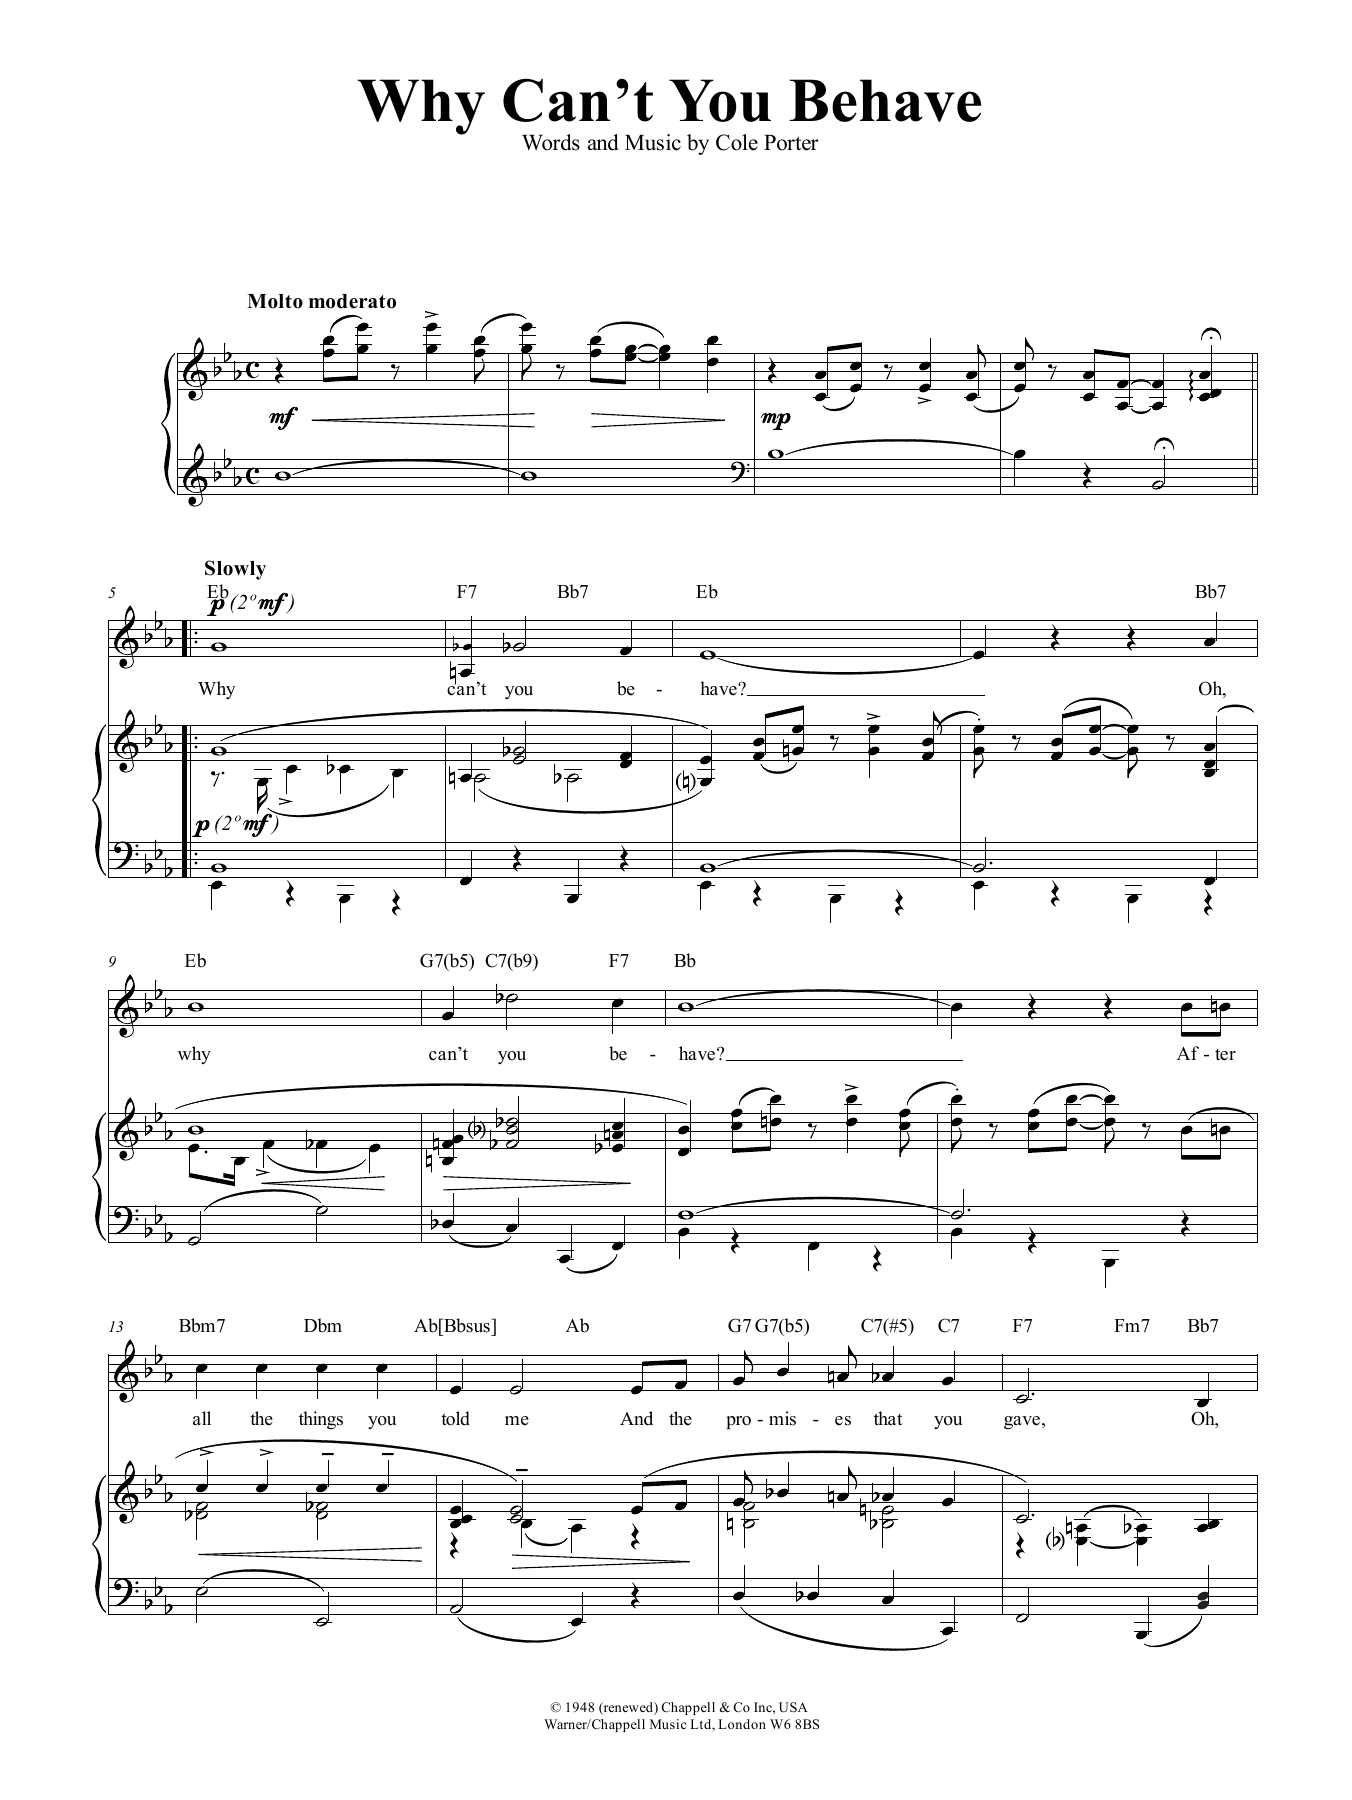 Download Cole Porter Why Can't You Behave? (from Kiss Me, Ka Sheet Music